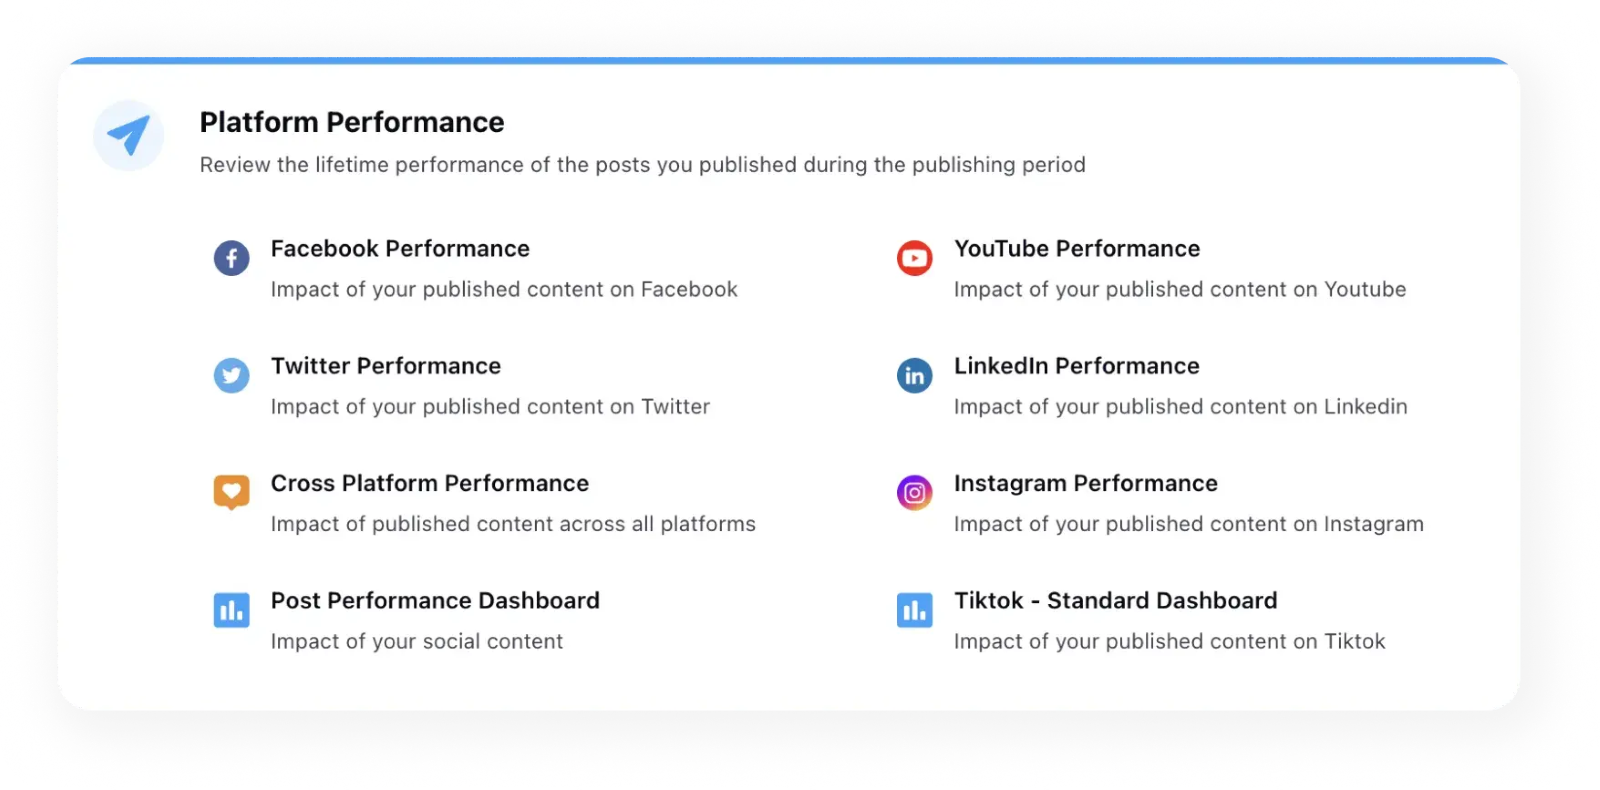 A Sprinklr dashboard where you can access social media platform performance details from.